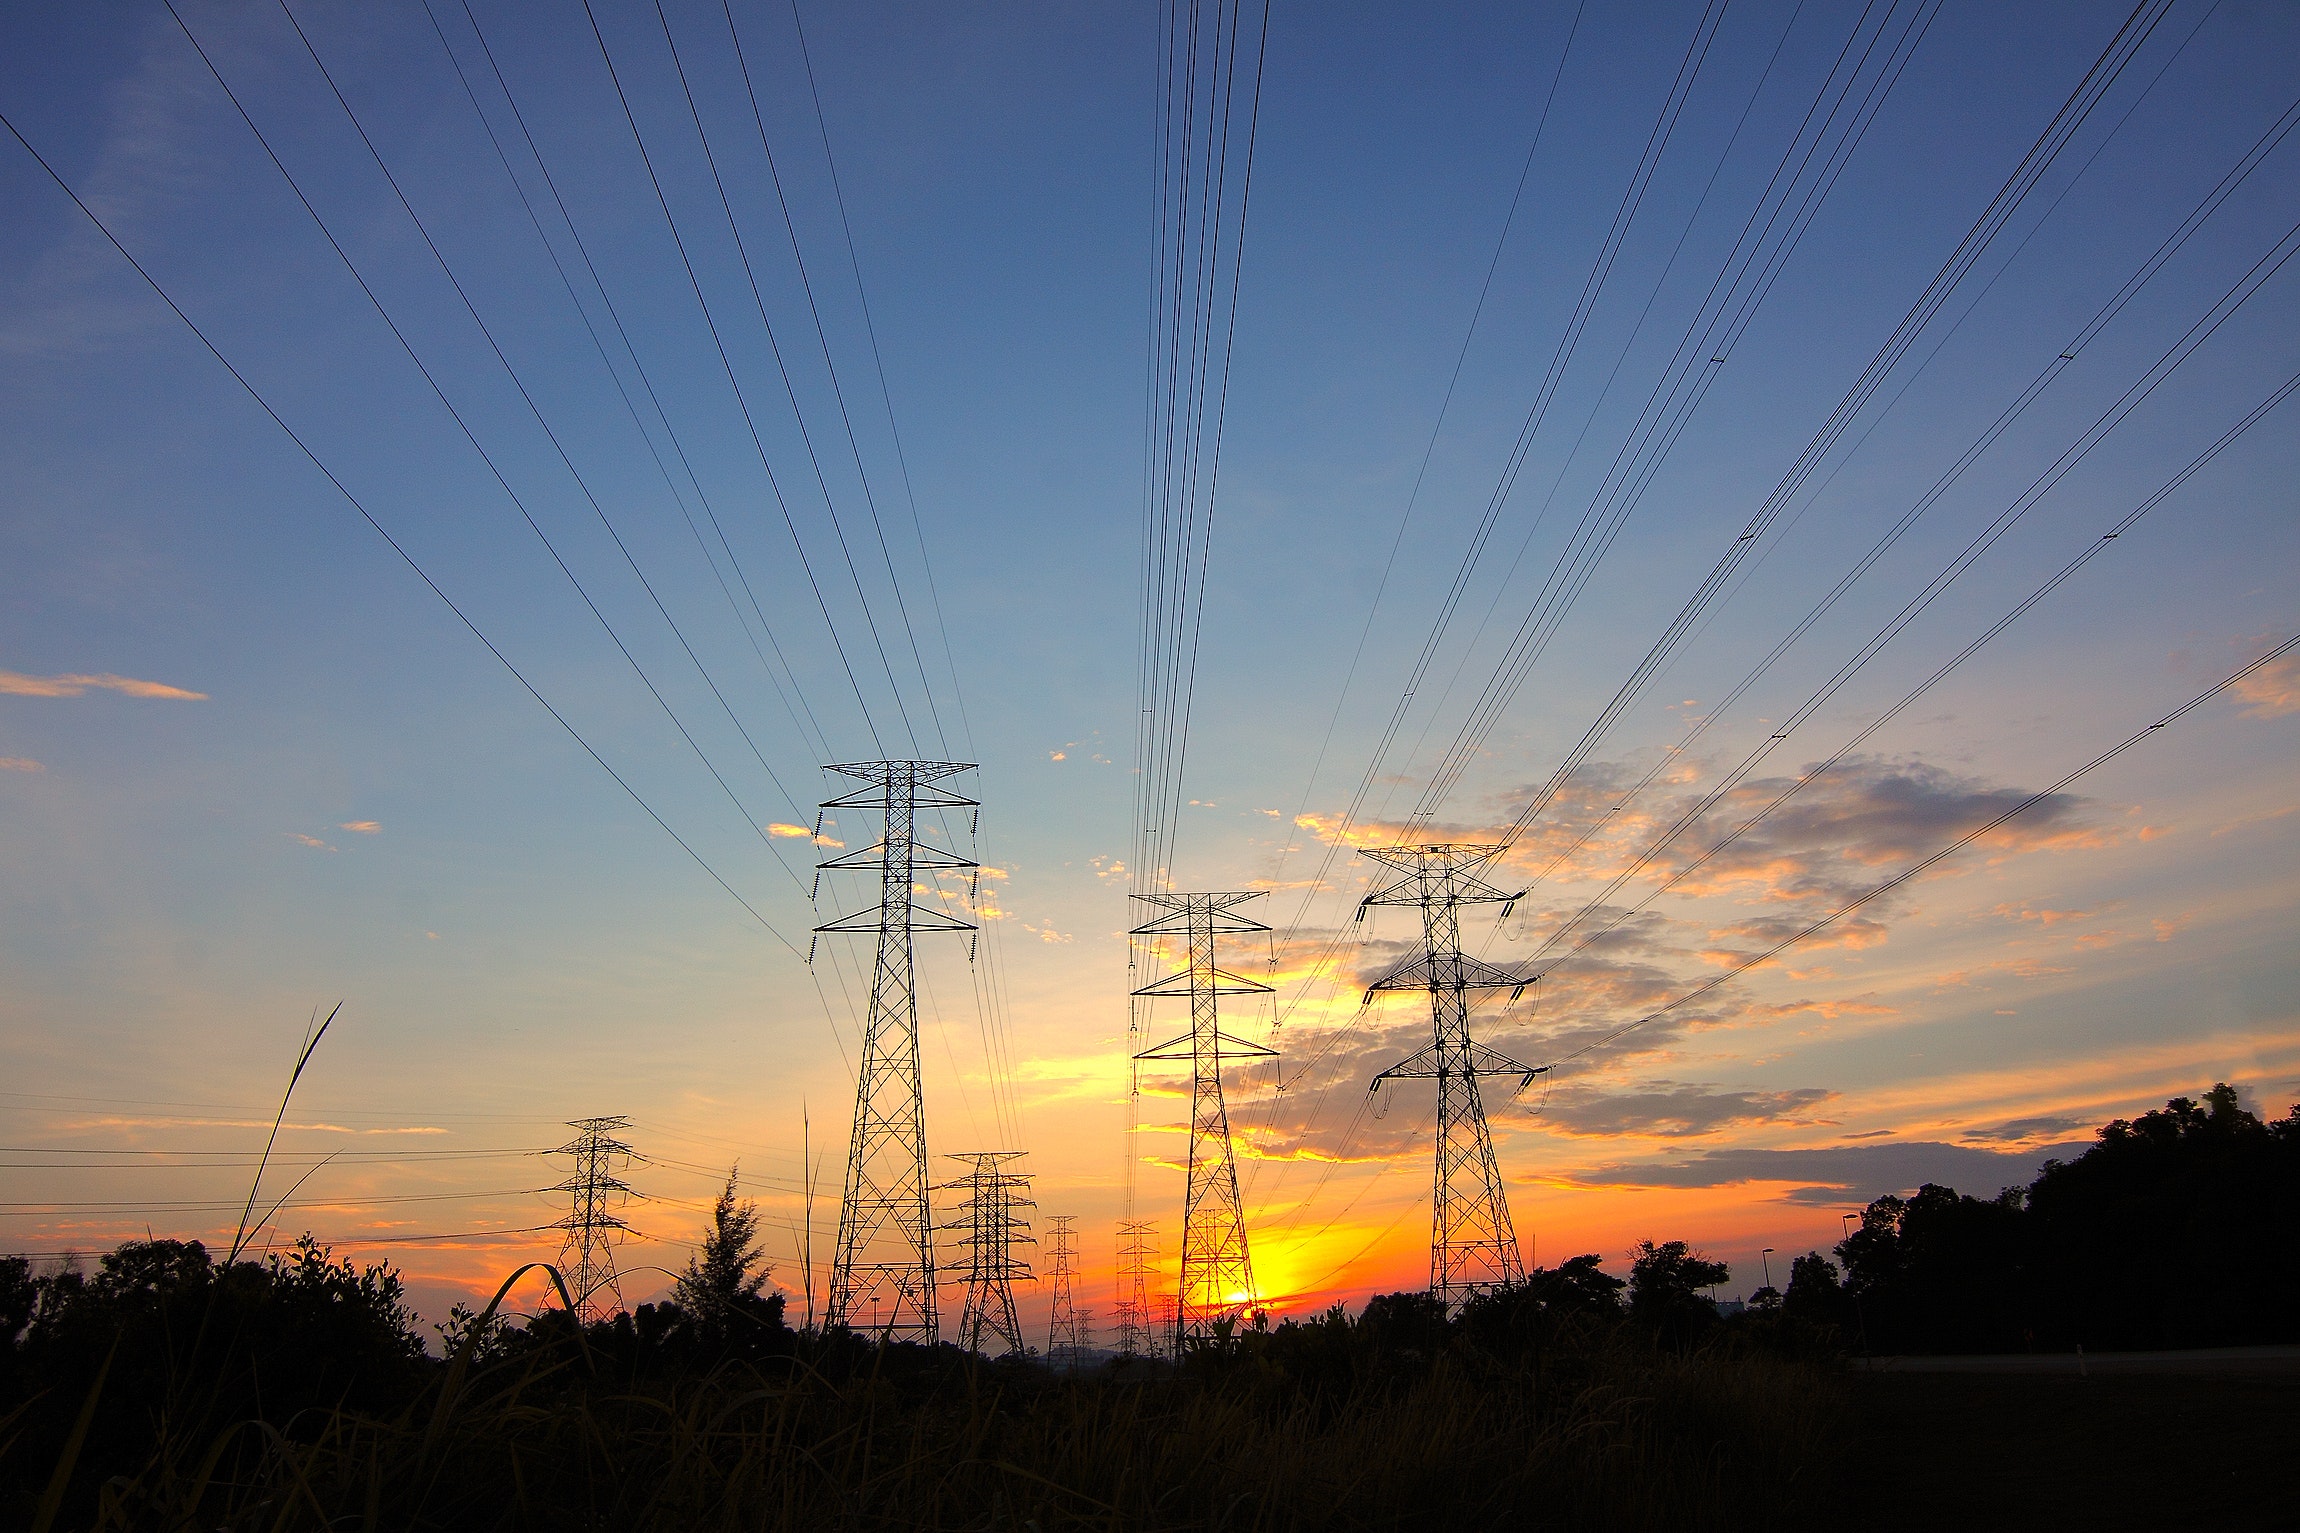 Power Lines in Sunset